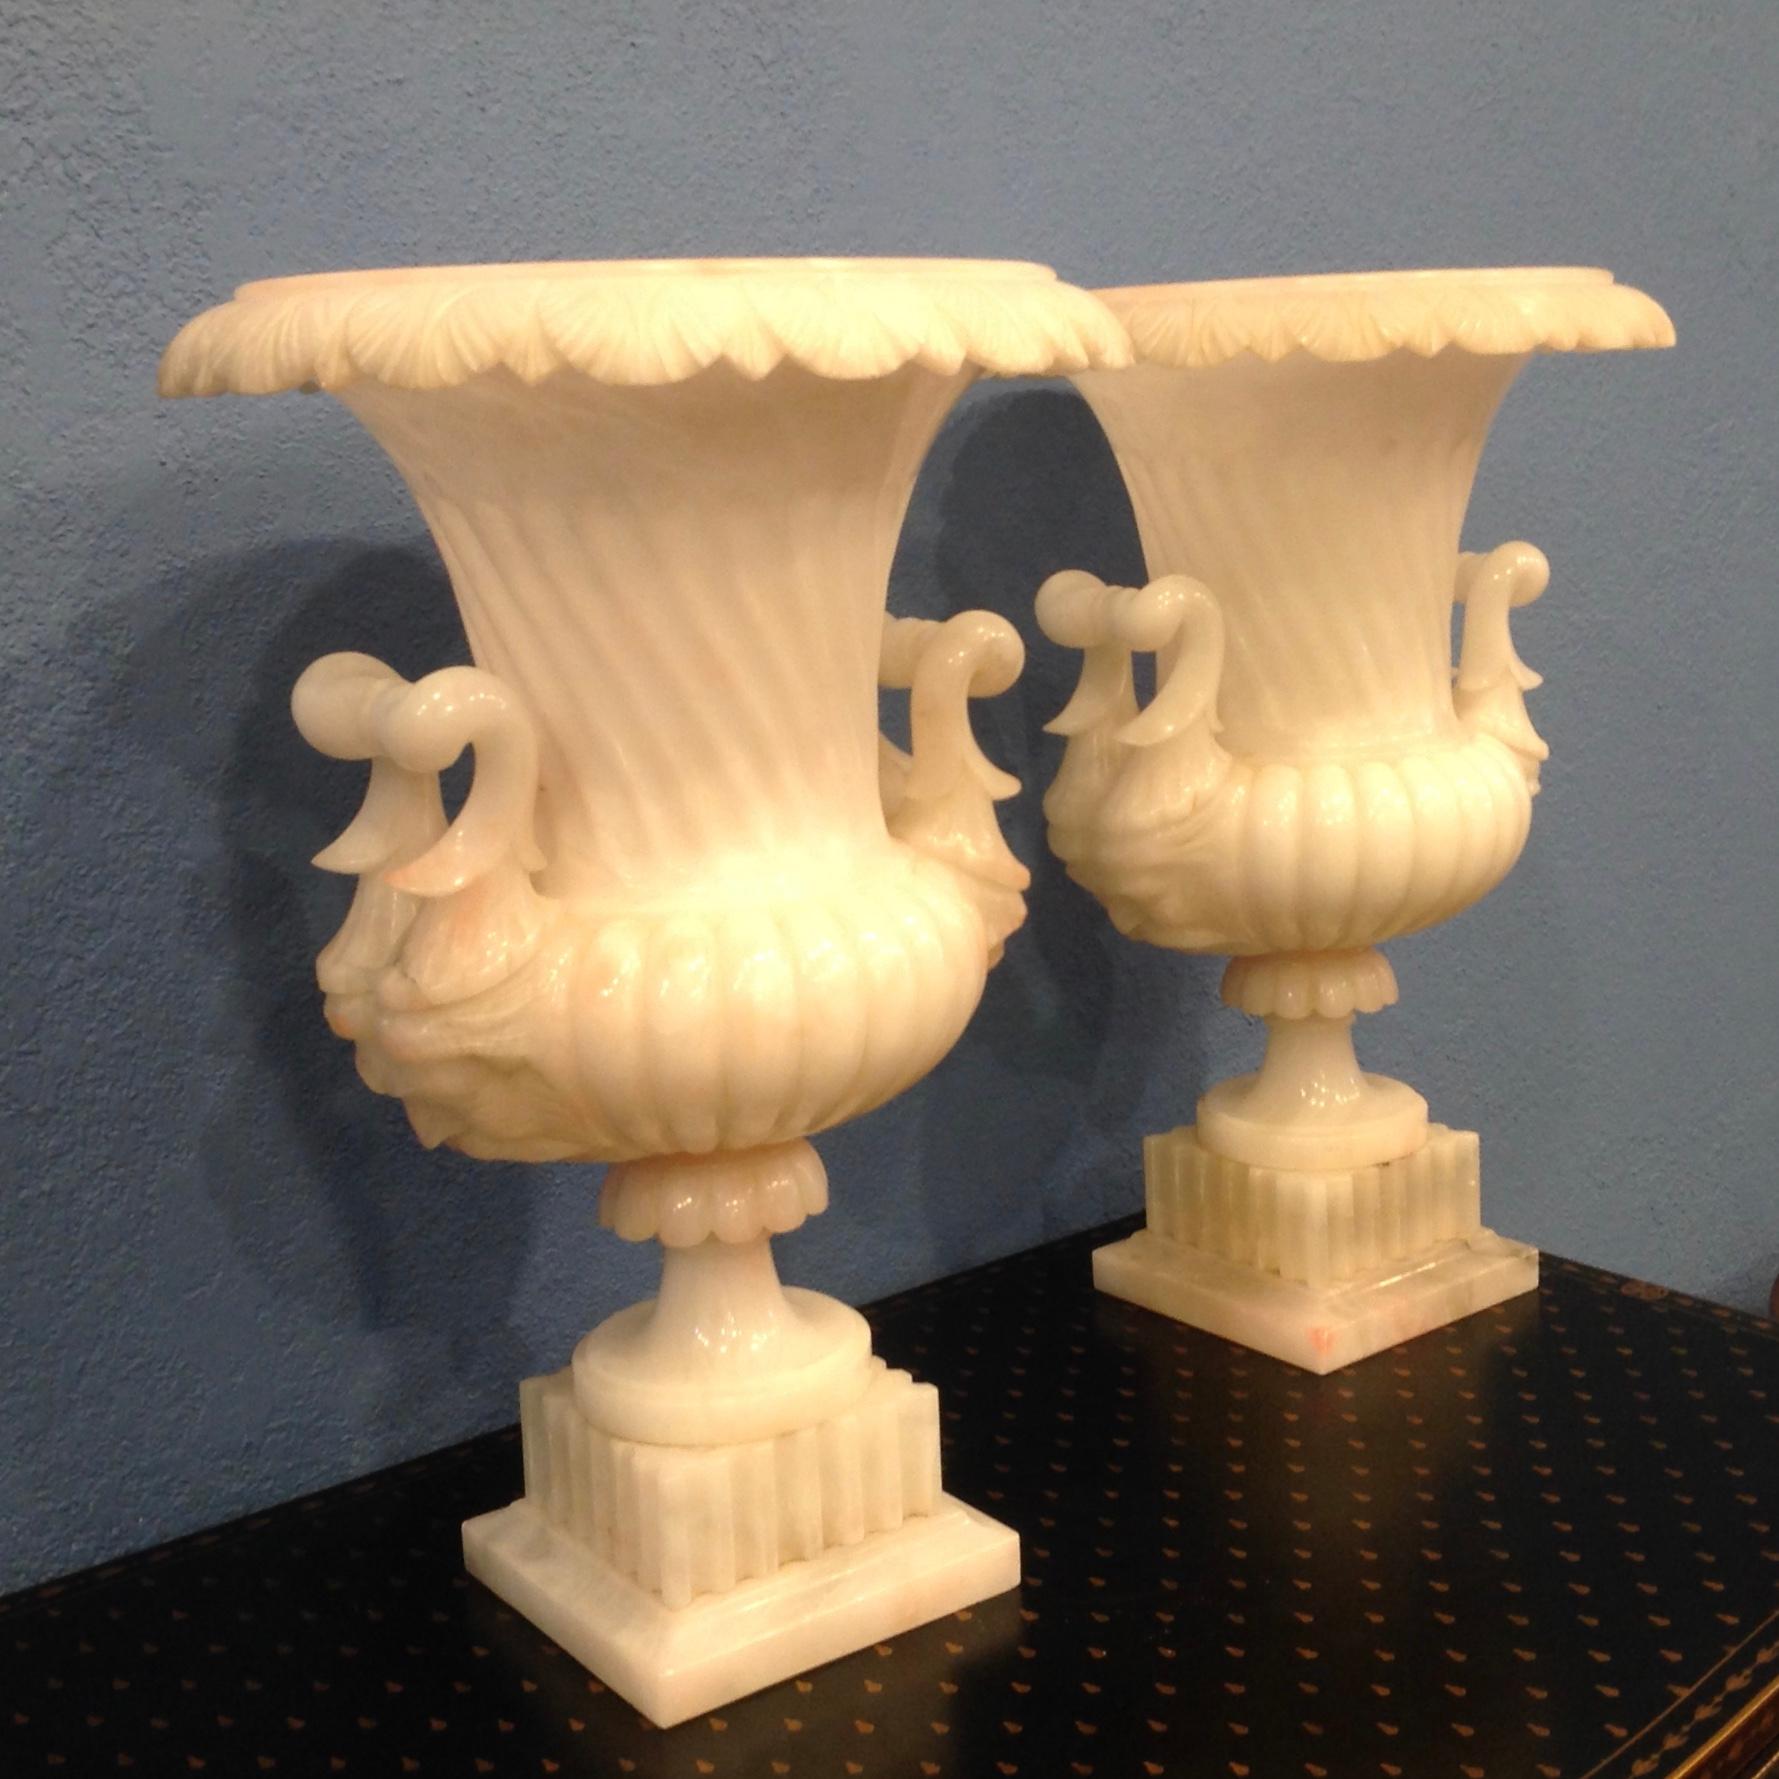 Sensational quality and design.
The urns are fluted and ribbed; and the handles are appointed with faces.